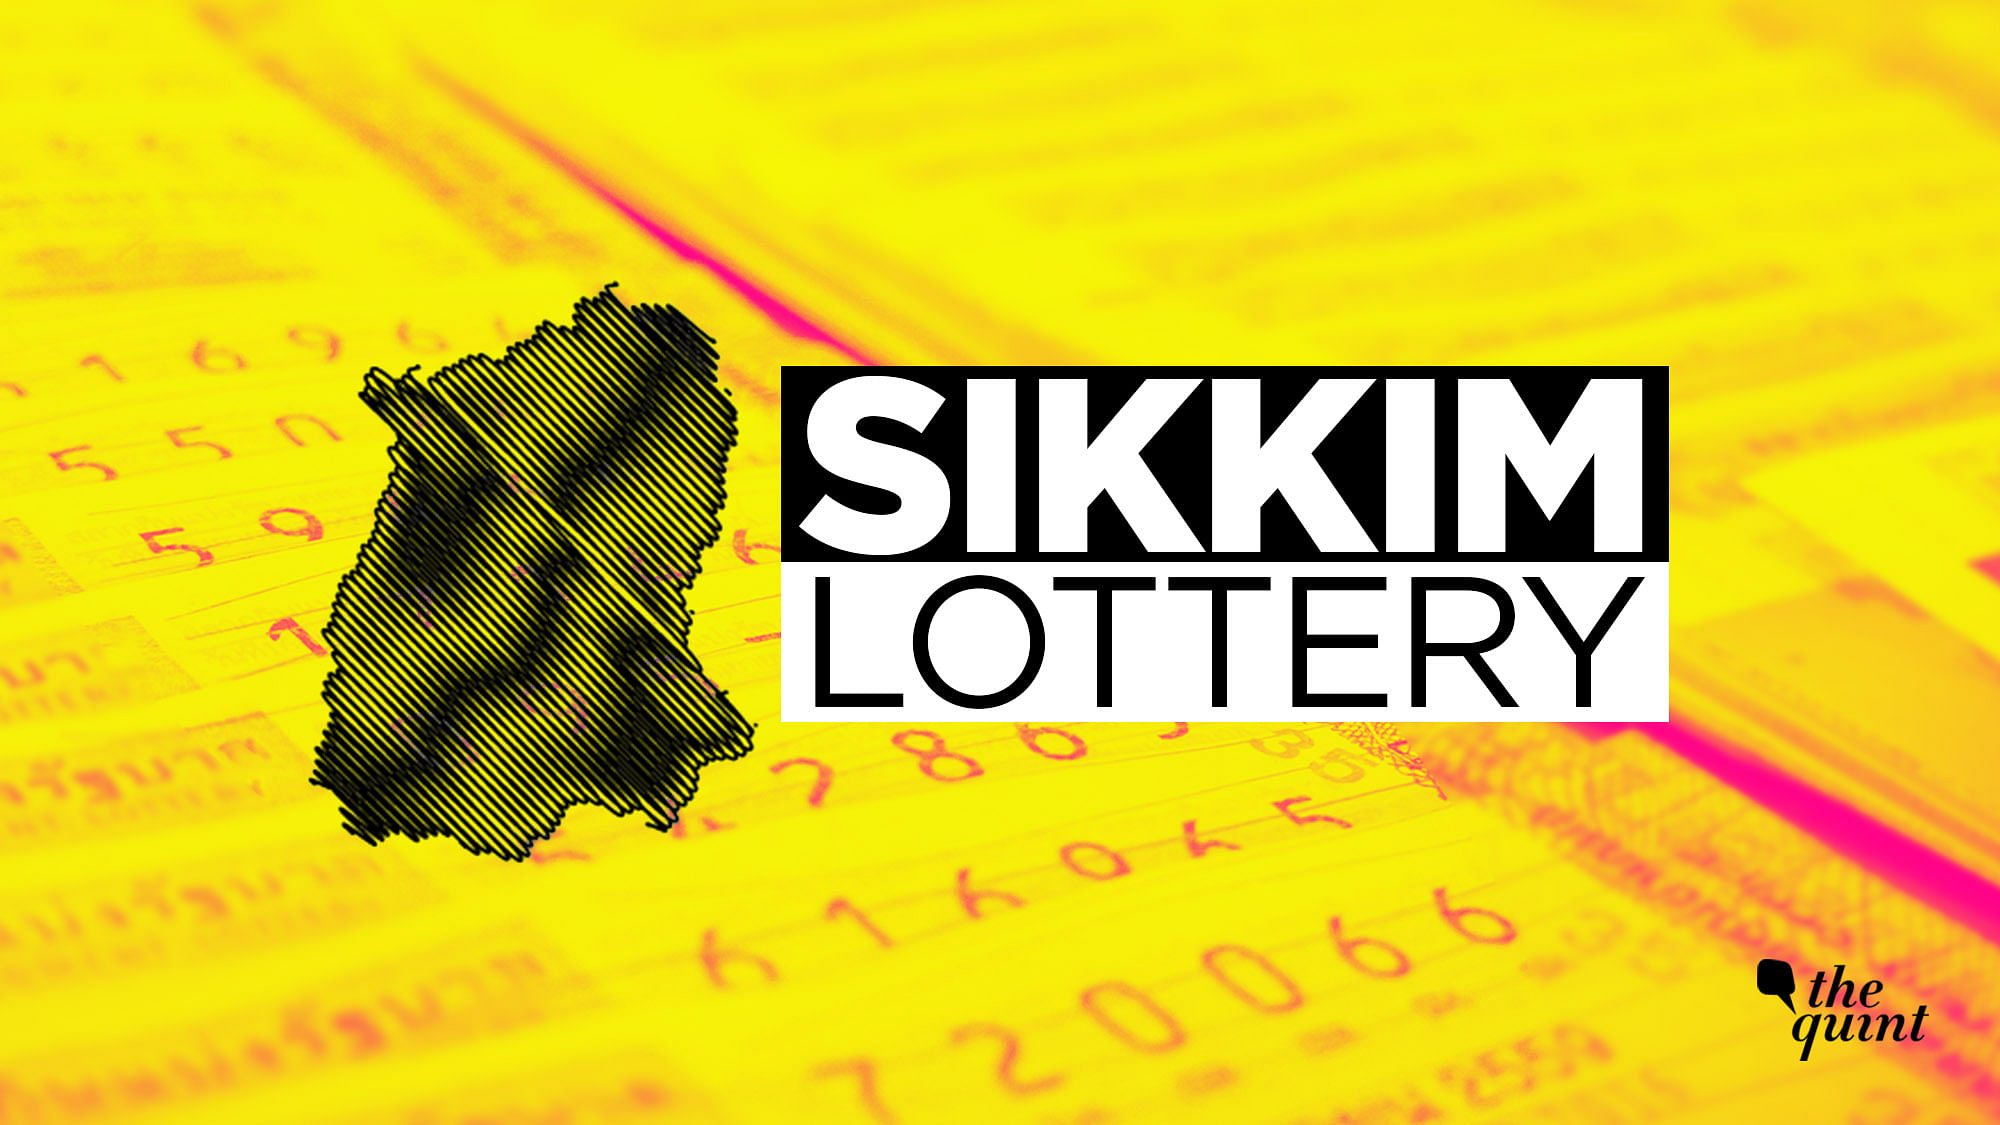 Today Lottery Sambad: The Sikkim lottery results will be declared at 11:55 am on 23 August 2019.